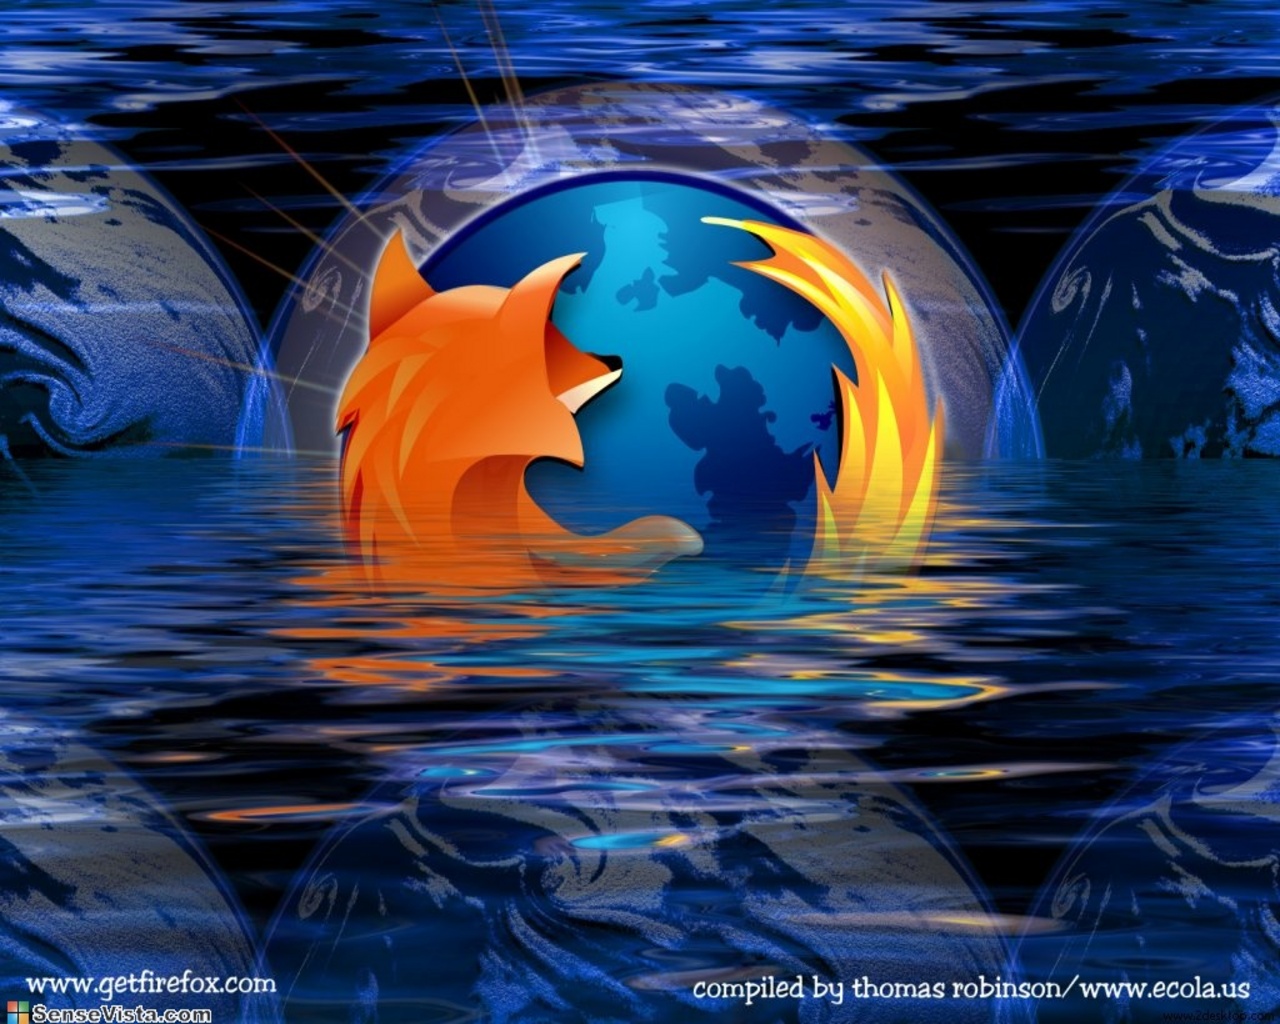 Few Minutes Ago August 27th The Mozilla Firefox Web Browser